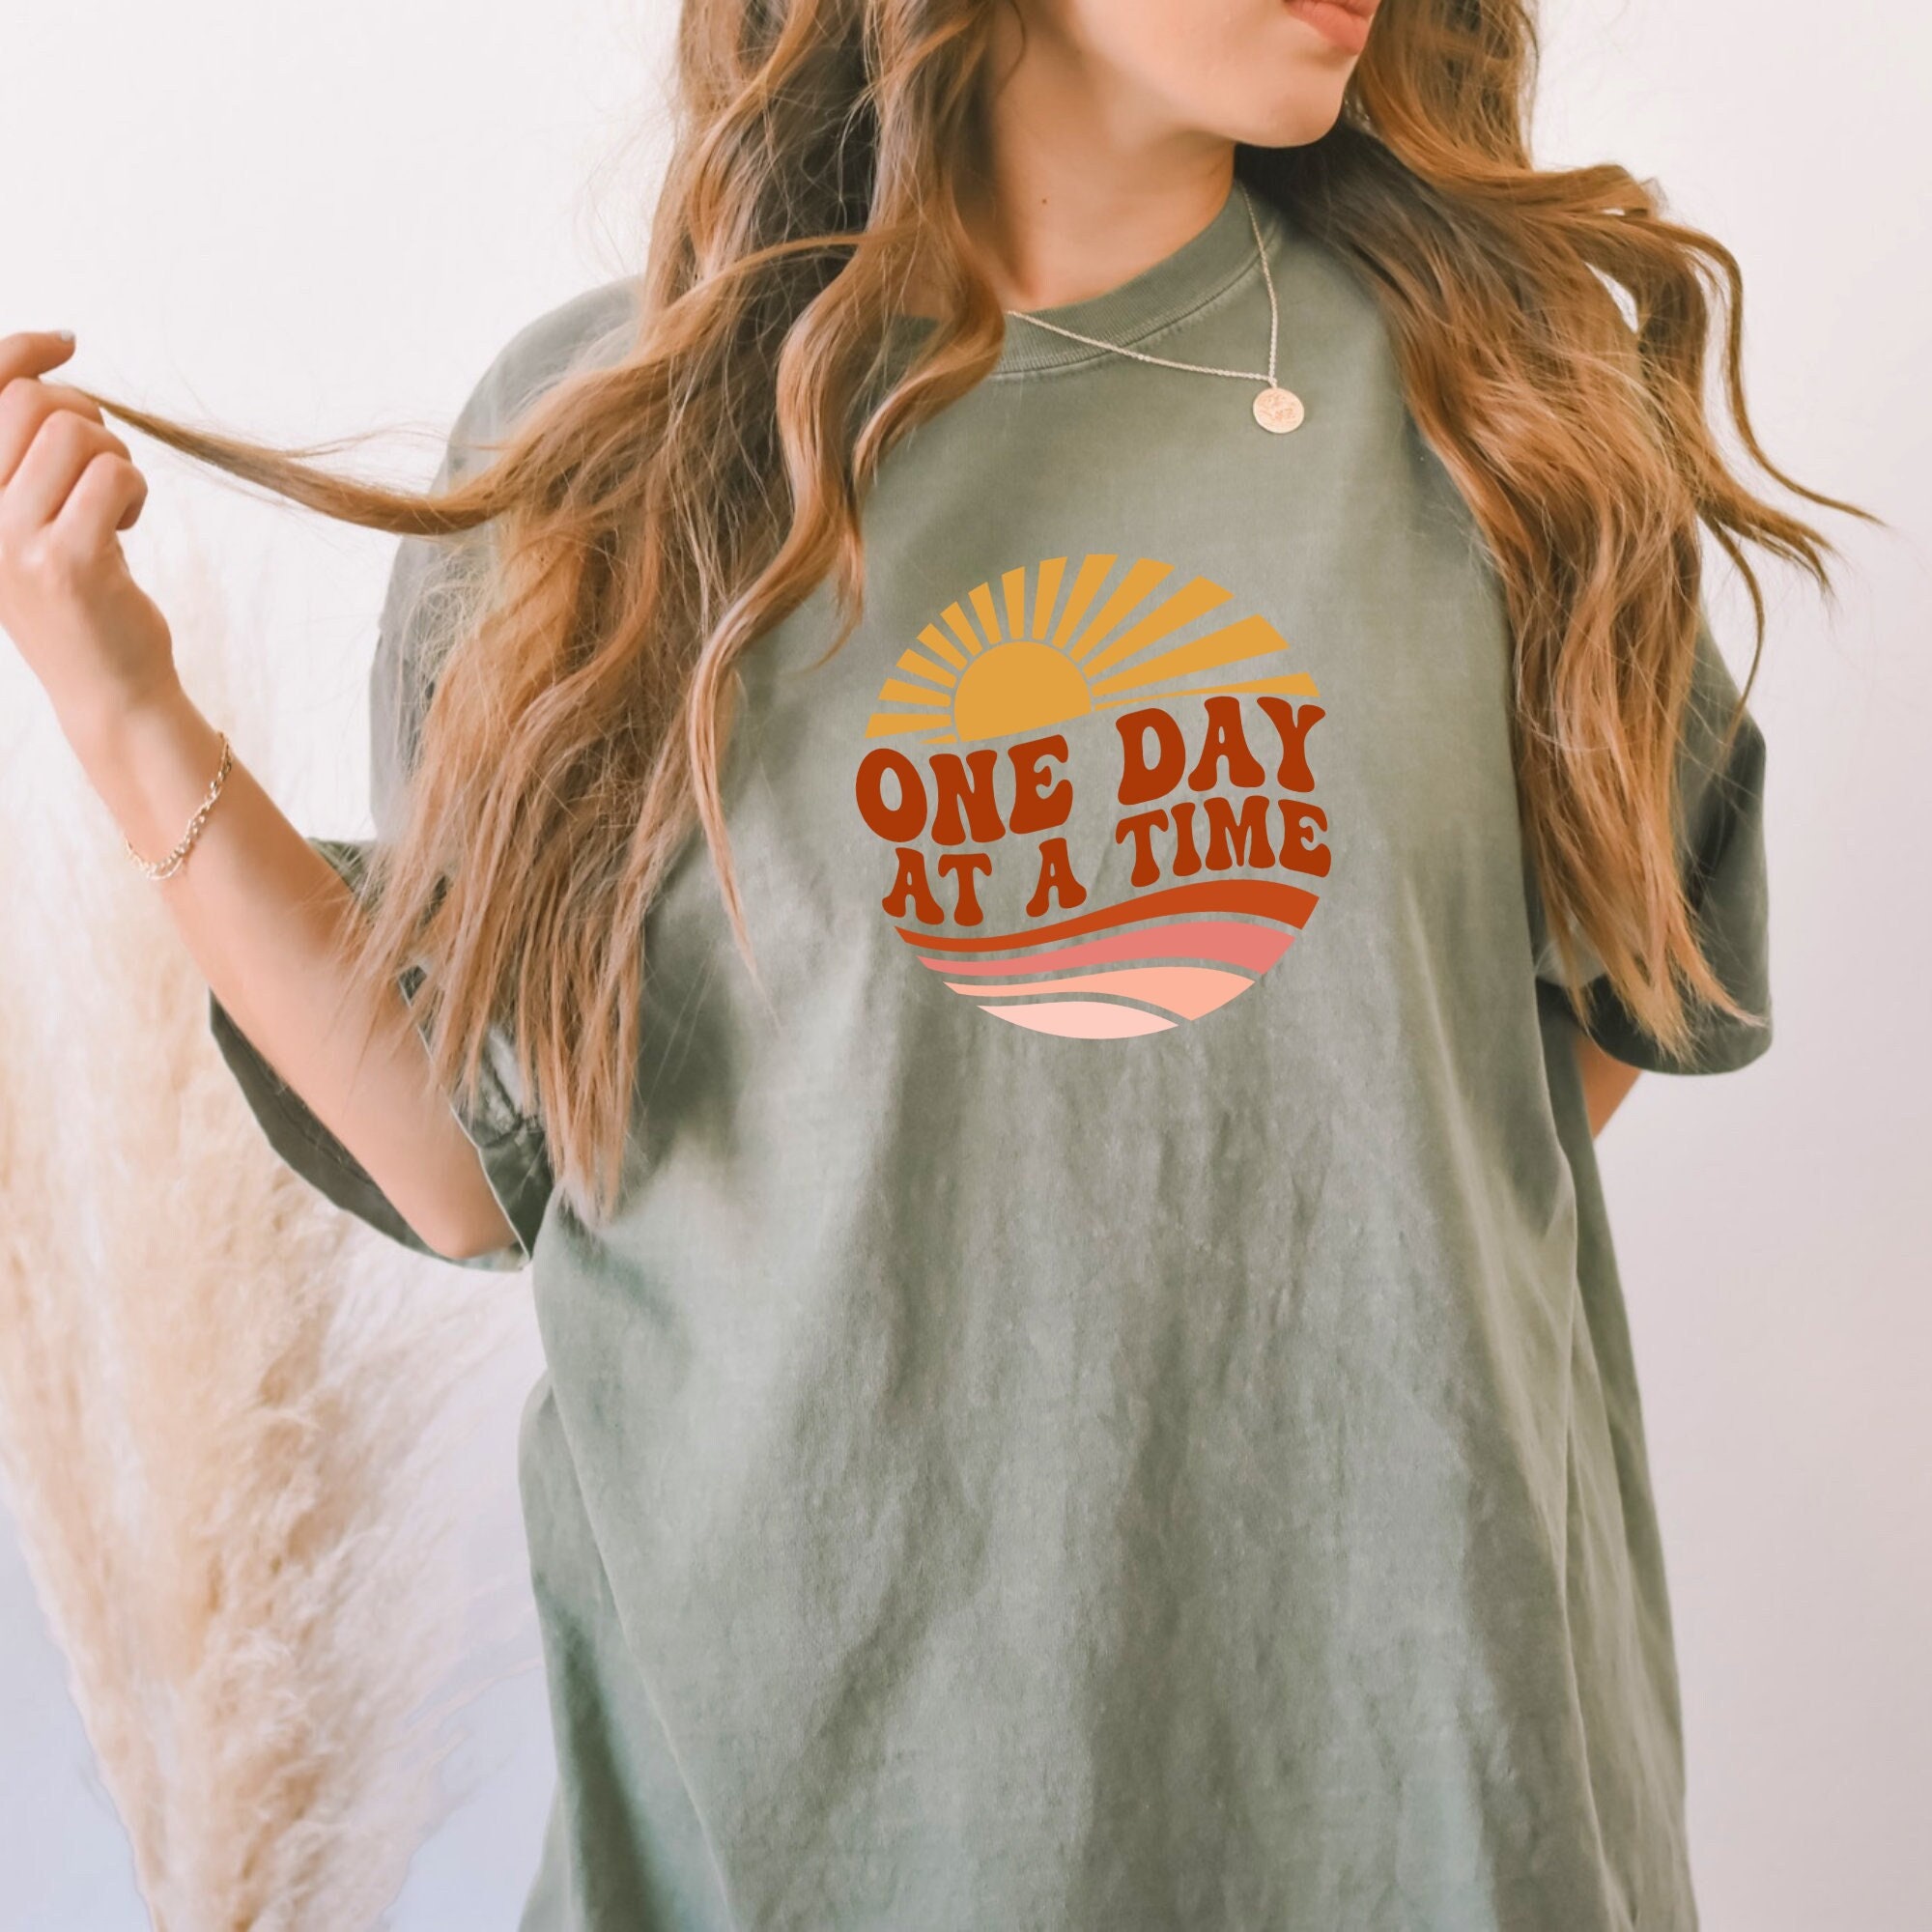 One Day at Time T-shirt Inspirational Shirt Womens Hippie - Etsy Israel